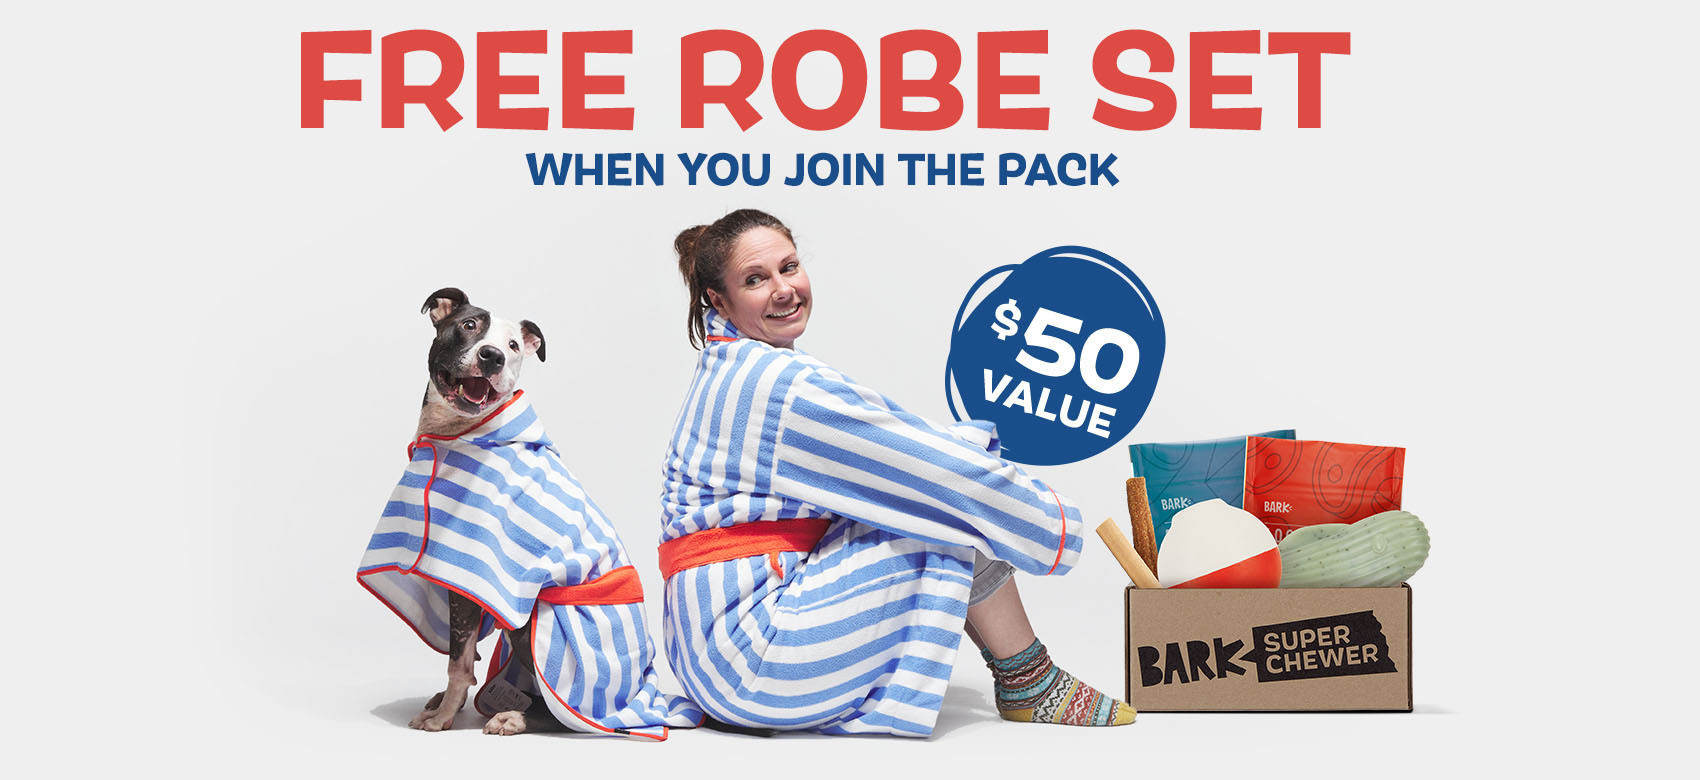 Free robe set when you join the pack - $50 value